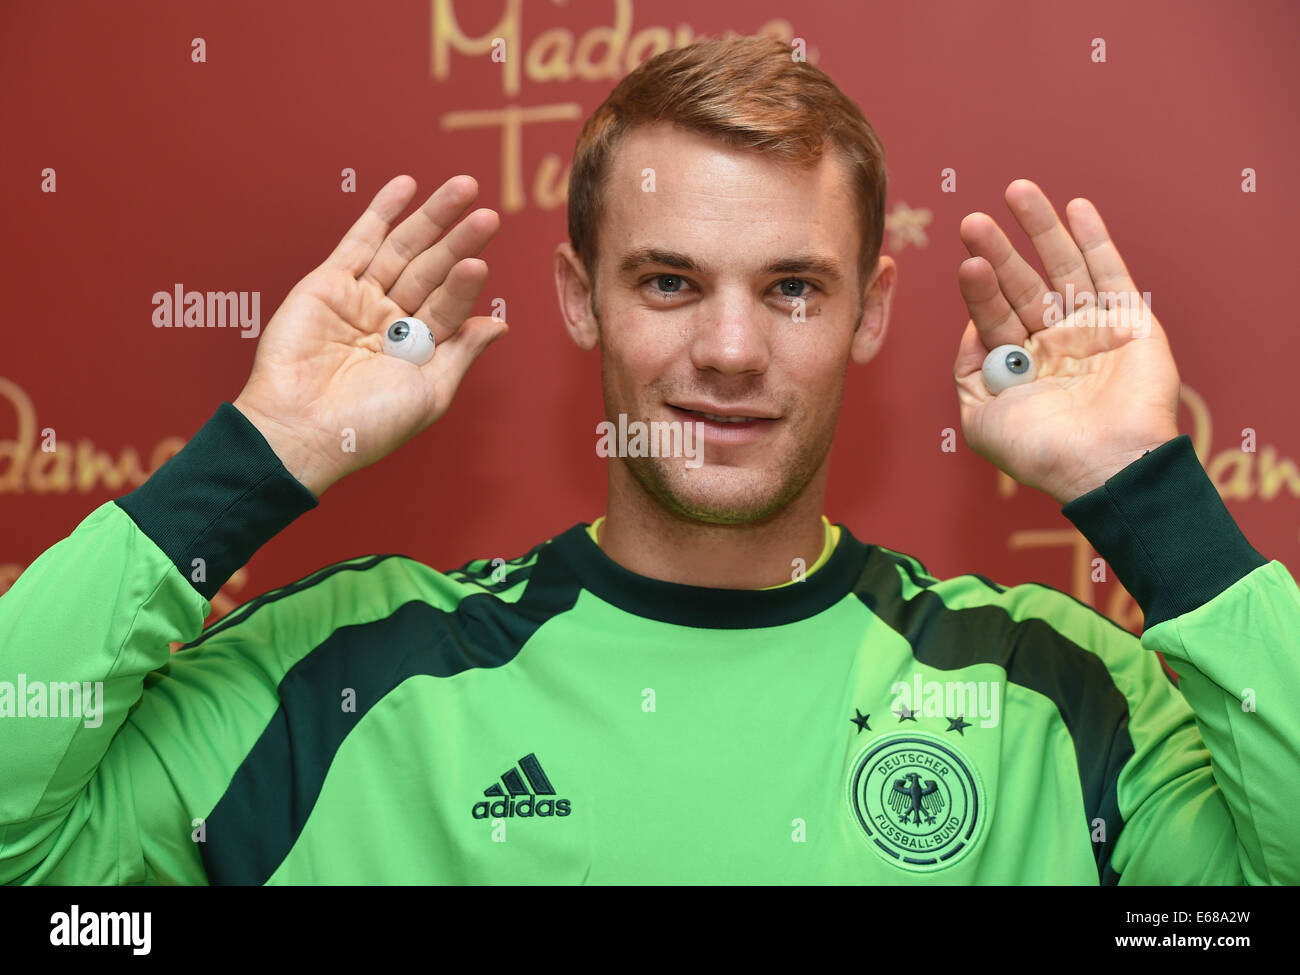 Germany's goal keeper Manuel Neuer poses during the so called sitting for his wax figure in the wax figure cabinet at Madame Tussaud's in Berlin, Germany, 14 August 2014. 226 measurments and around 150 pictures are taken. Eye colour, skin- and hair colour are colour-cordinated in order to create a lifelike wax figure. In four to six months the figure will be presented at Madame Tussaud's in Berlin. Photo: Jens Kalaene/dpa (ATTENTION: EMBARGO, TUESDAY, 19 AUGUST 2014, 00.01) Stock Photo